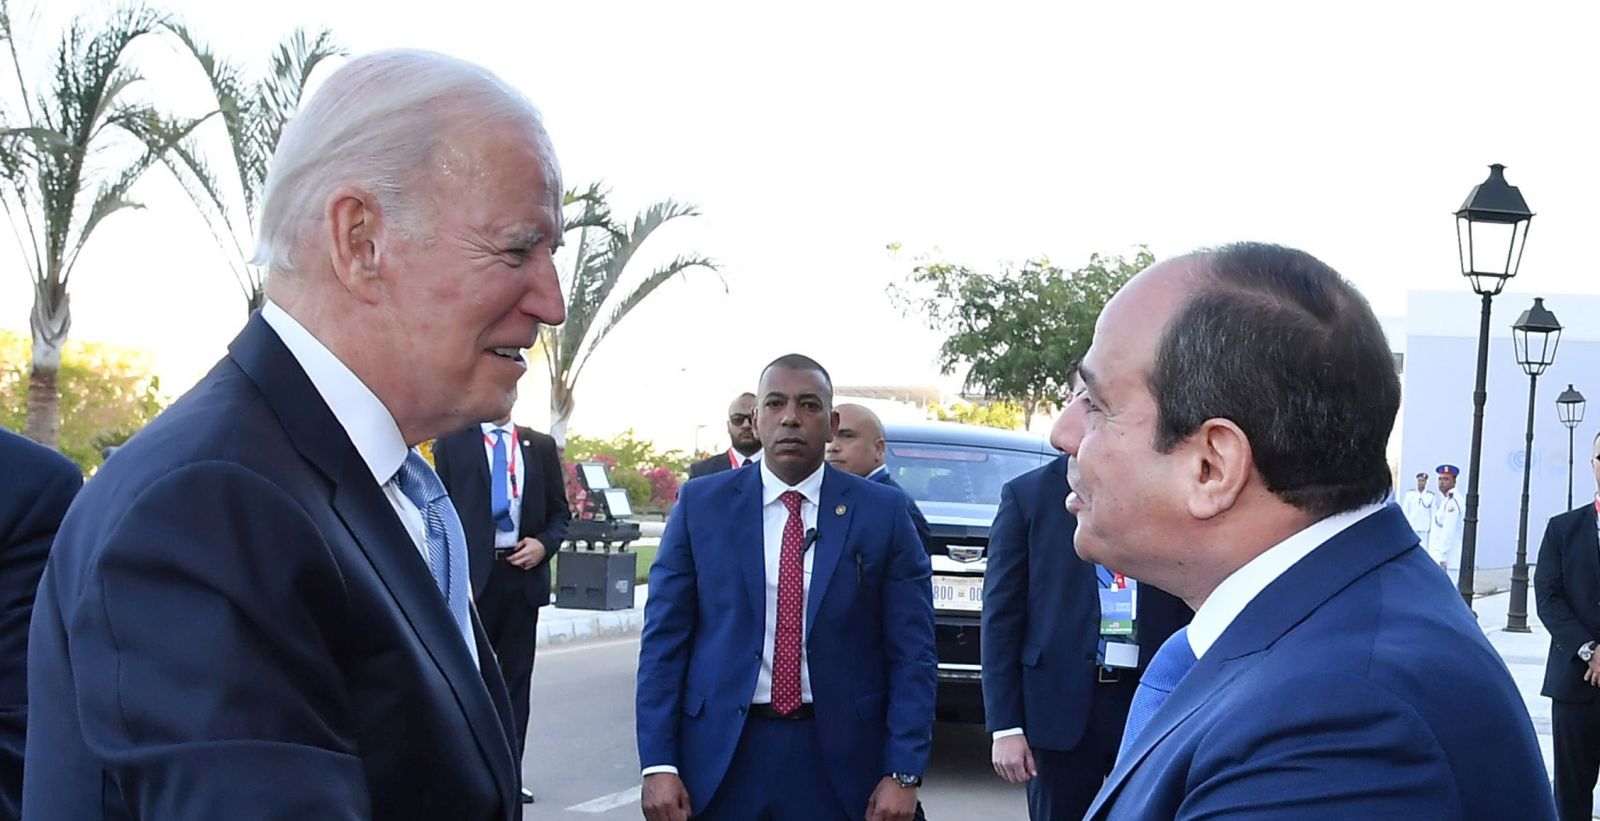 epa10300066 A handout photo made available by the Egyptian Presidency shows Egyptian President Abdel Fattah el-Sisi (R) and his US counterpart Joe Biden meeting on the sidelines of the COP27 summit, in Sharm El-Sheikh, Egypt, 11 November 2022. COP27 runs from 06-18 November, and is expected to host one of the largest number of participants in the annual global climate conference as over 40,000 estimated attendees, including heads of states and governments, civil society, media and other relevant stakeholders will attend. The events will include a Climate Implementation Summit, thematic days, flagship initiatives, and Green Zone activities engaging with climate and other global challenges.  EPA/EGYPTIAN PRESIDENCY HANDOUT  HANDOUT EDITORIAL USE ONLY/NO SALES